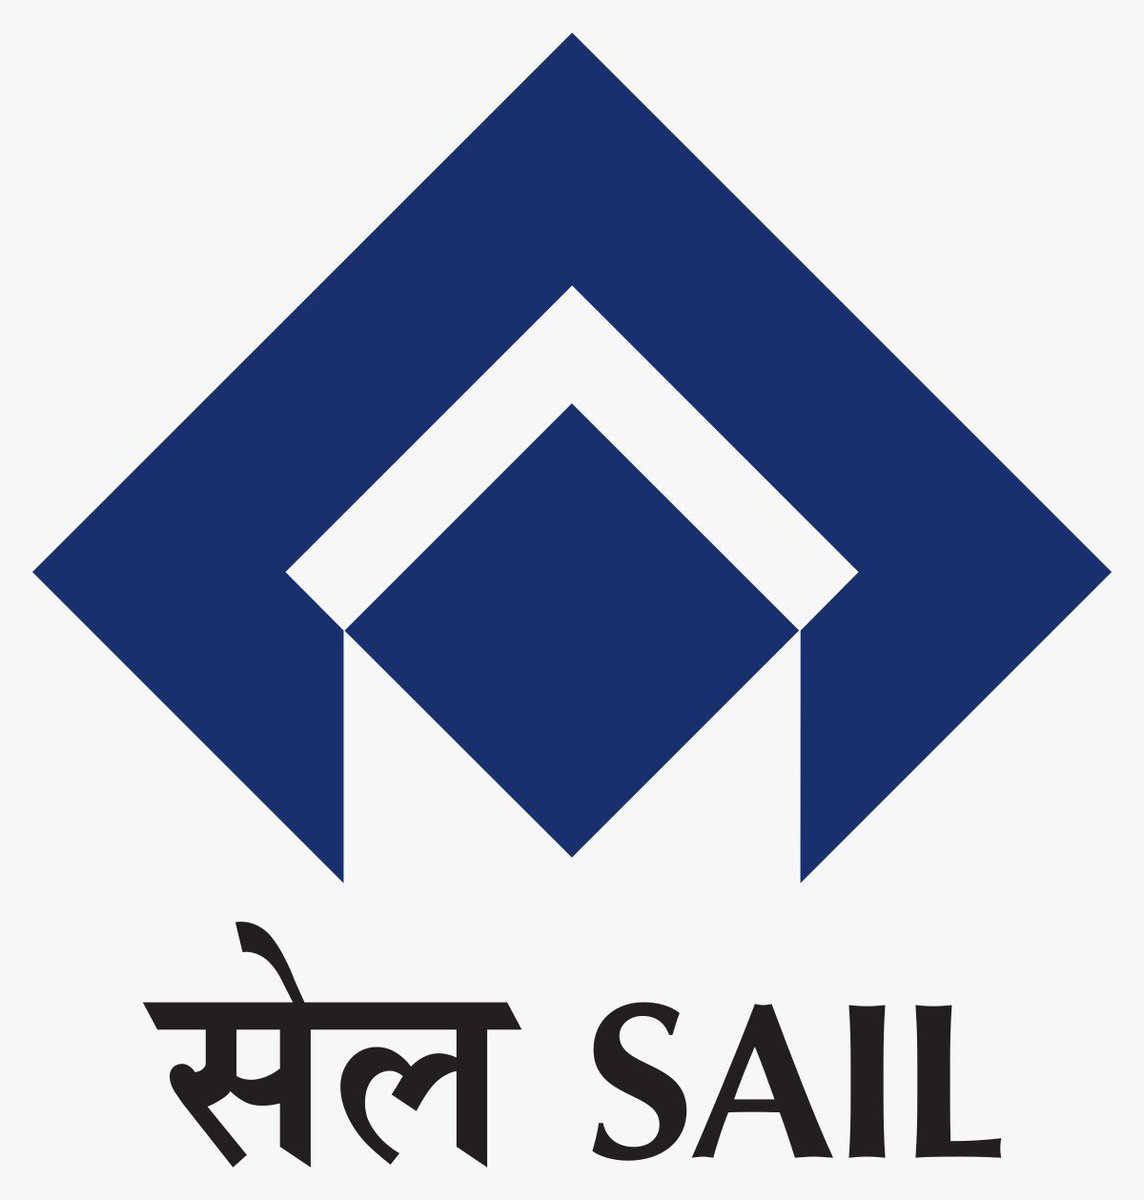 Government has respectively received about Rs 790 crore and Rs 134 crore from IRFC and SAIL as dividend tranches.